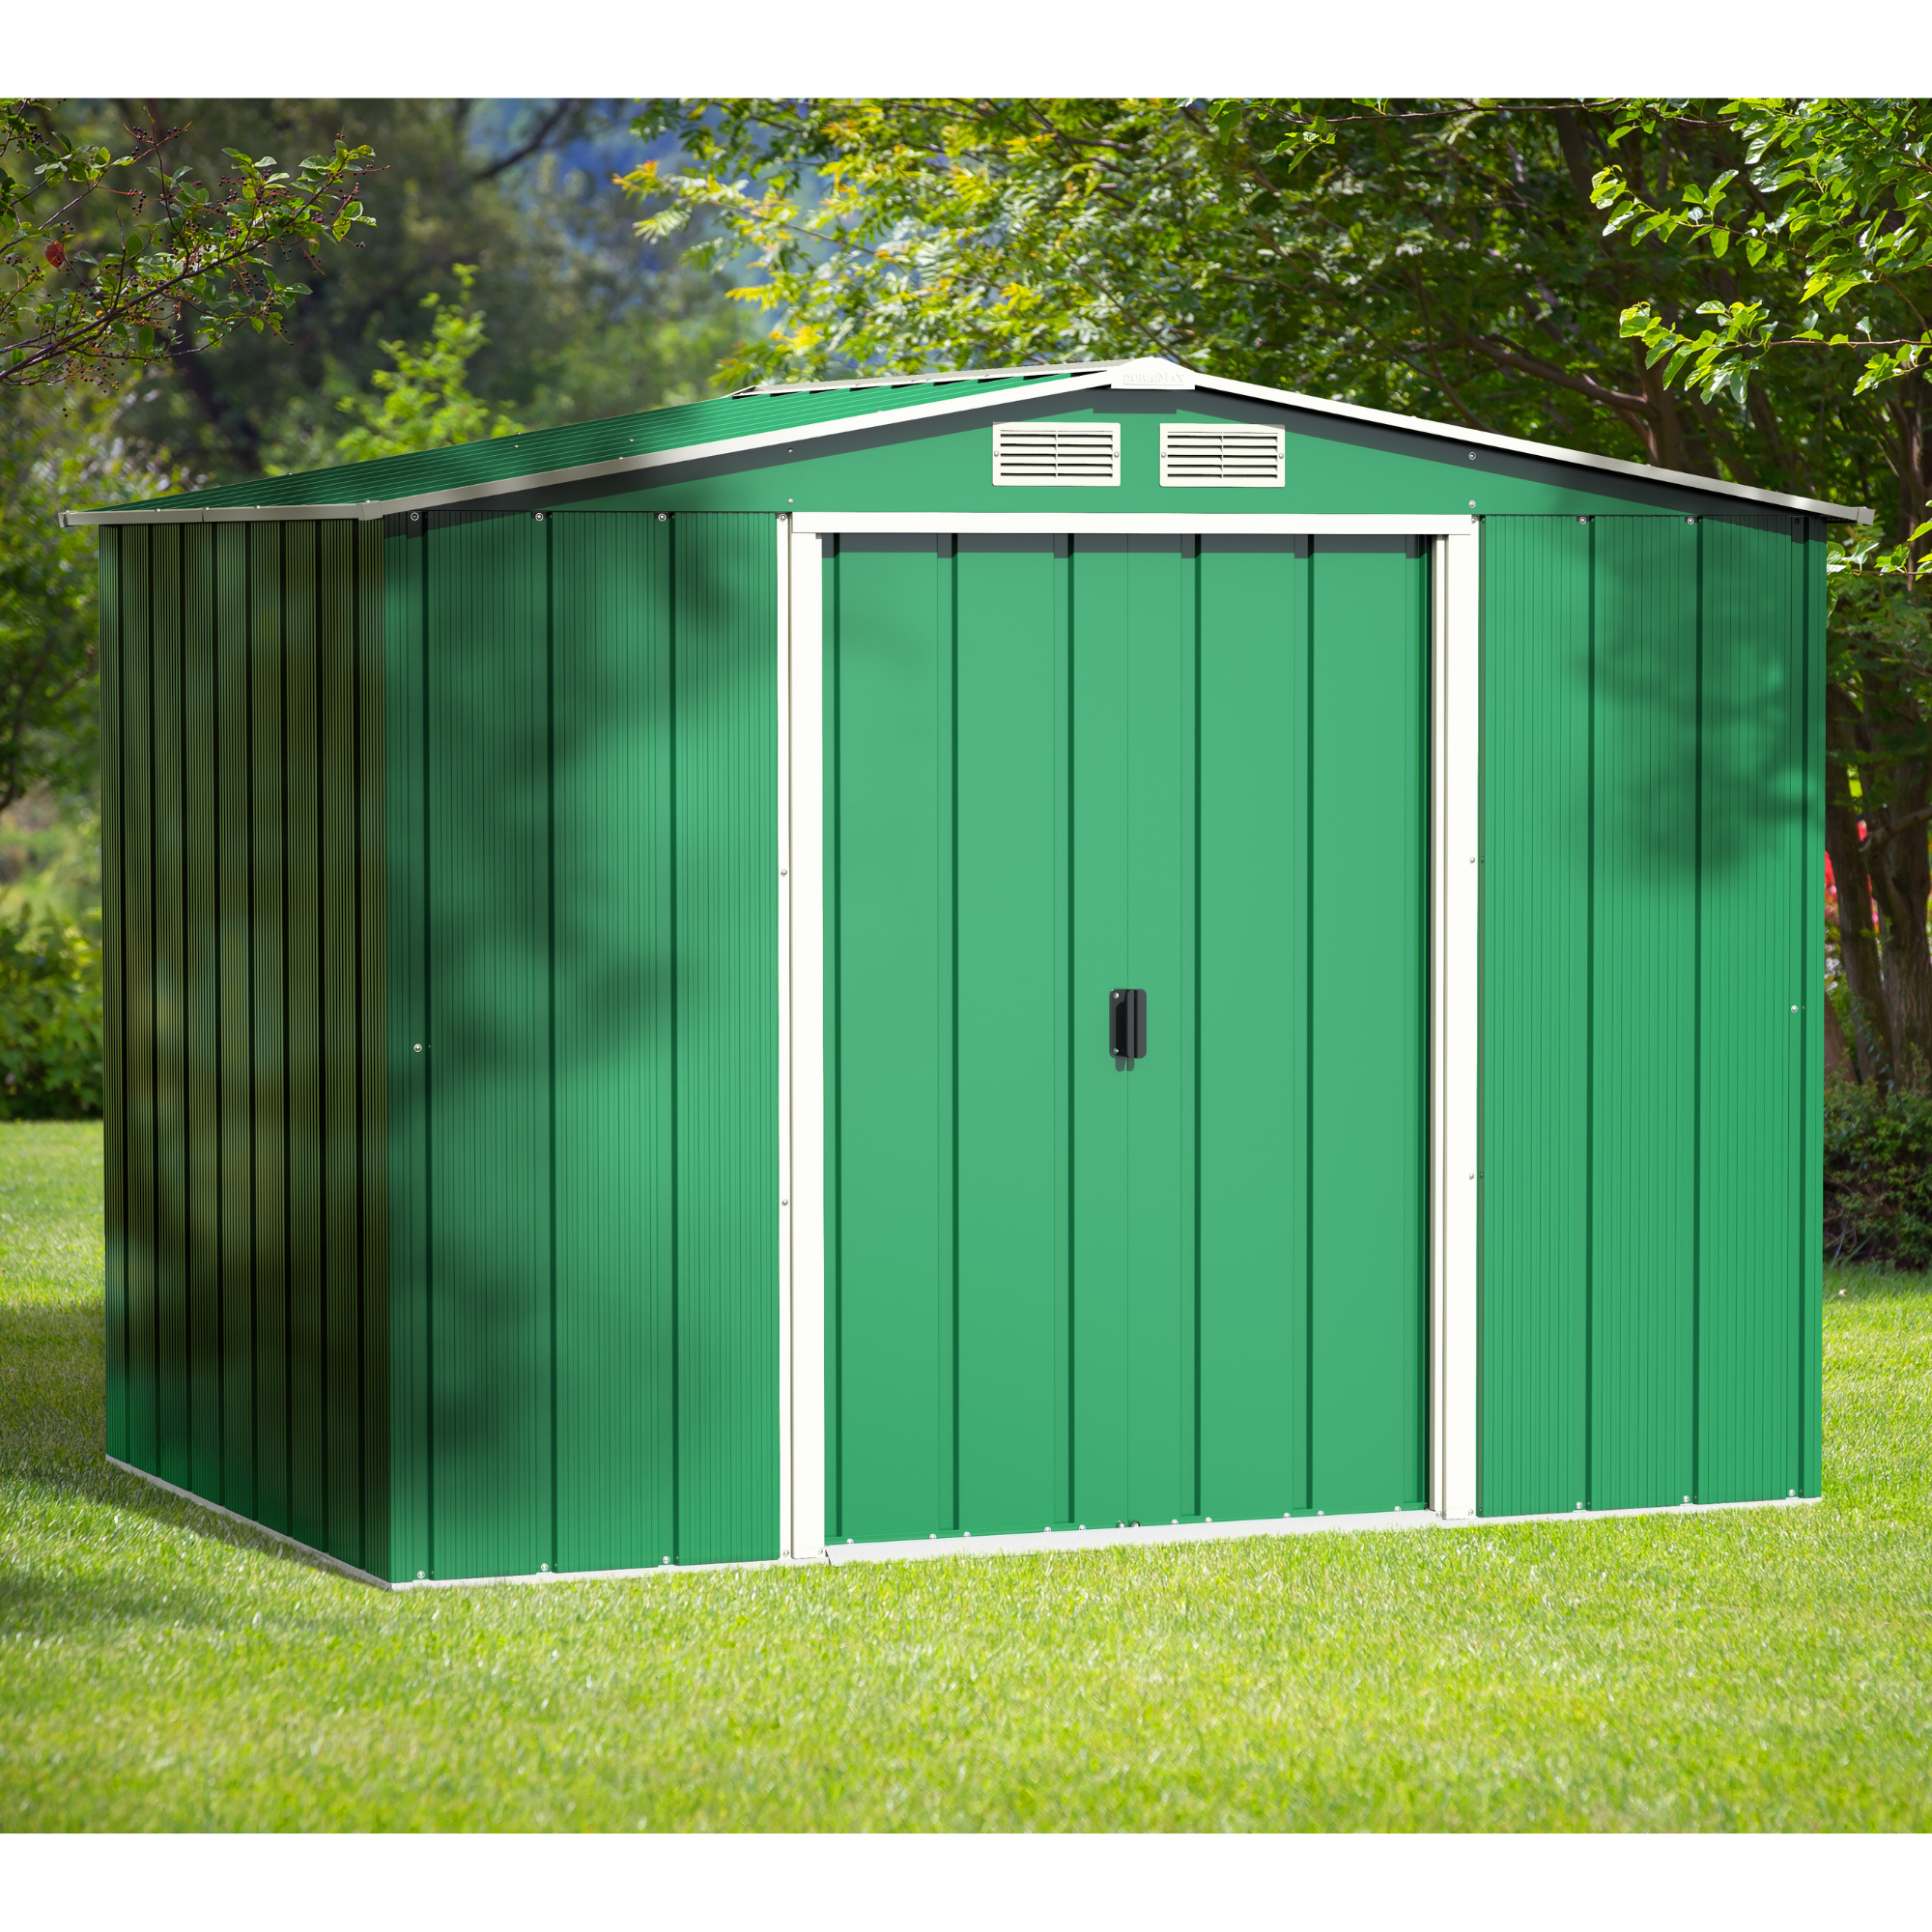 BillyOh Partner Eco Apex Roof Metal Shed - 8x6 Apex Eco - Duramax Eco Metal Shed